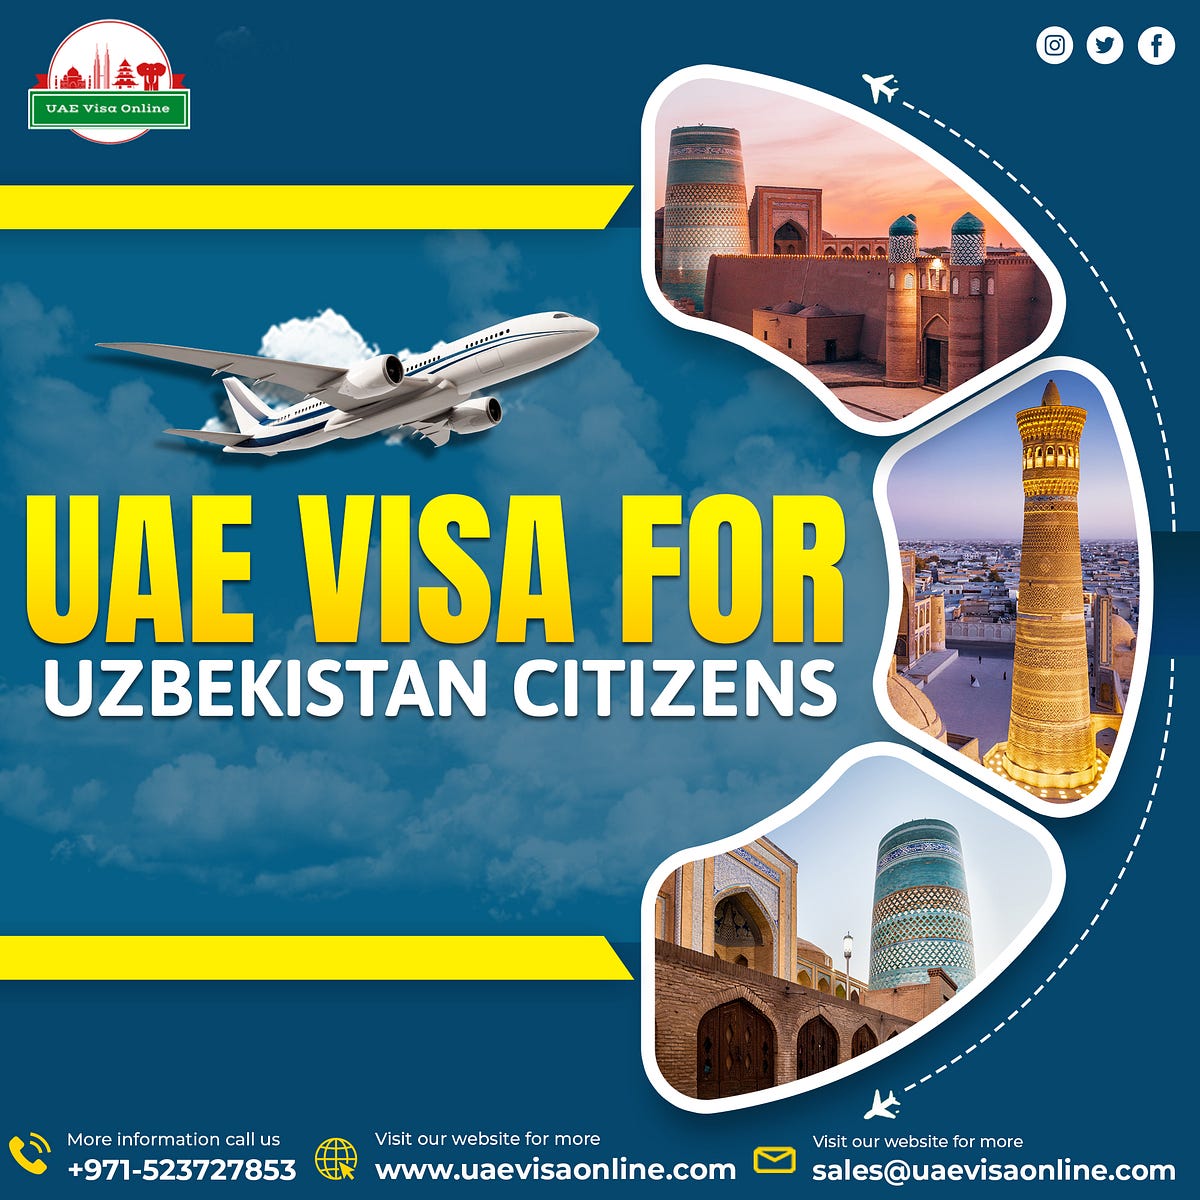 Uae Visa For Uzbekistan Citizens In Recent Years The Uae Has Emerged As… By Uaevisaonline